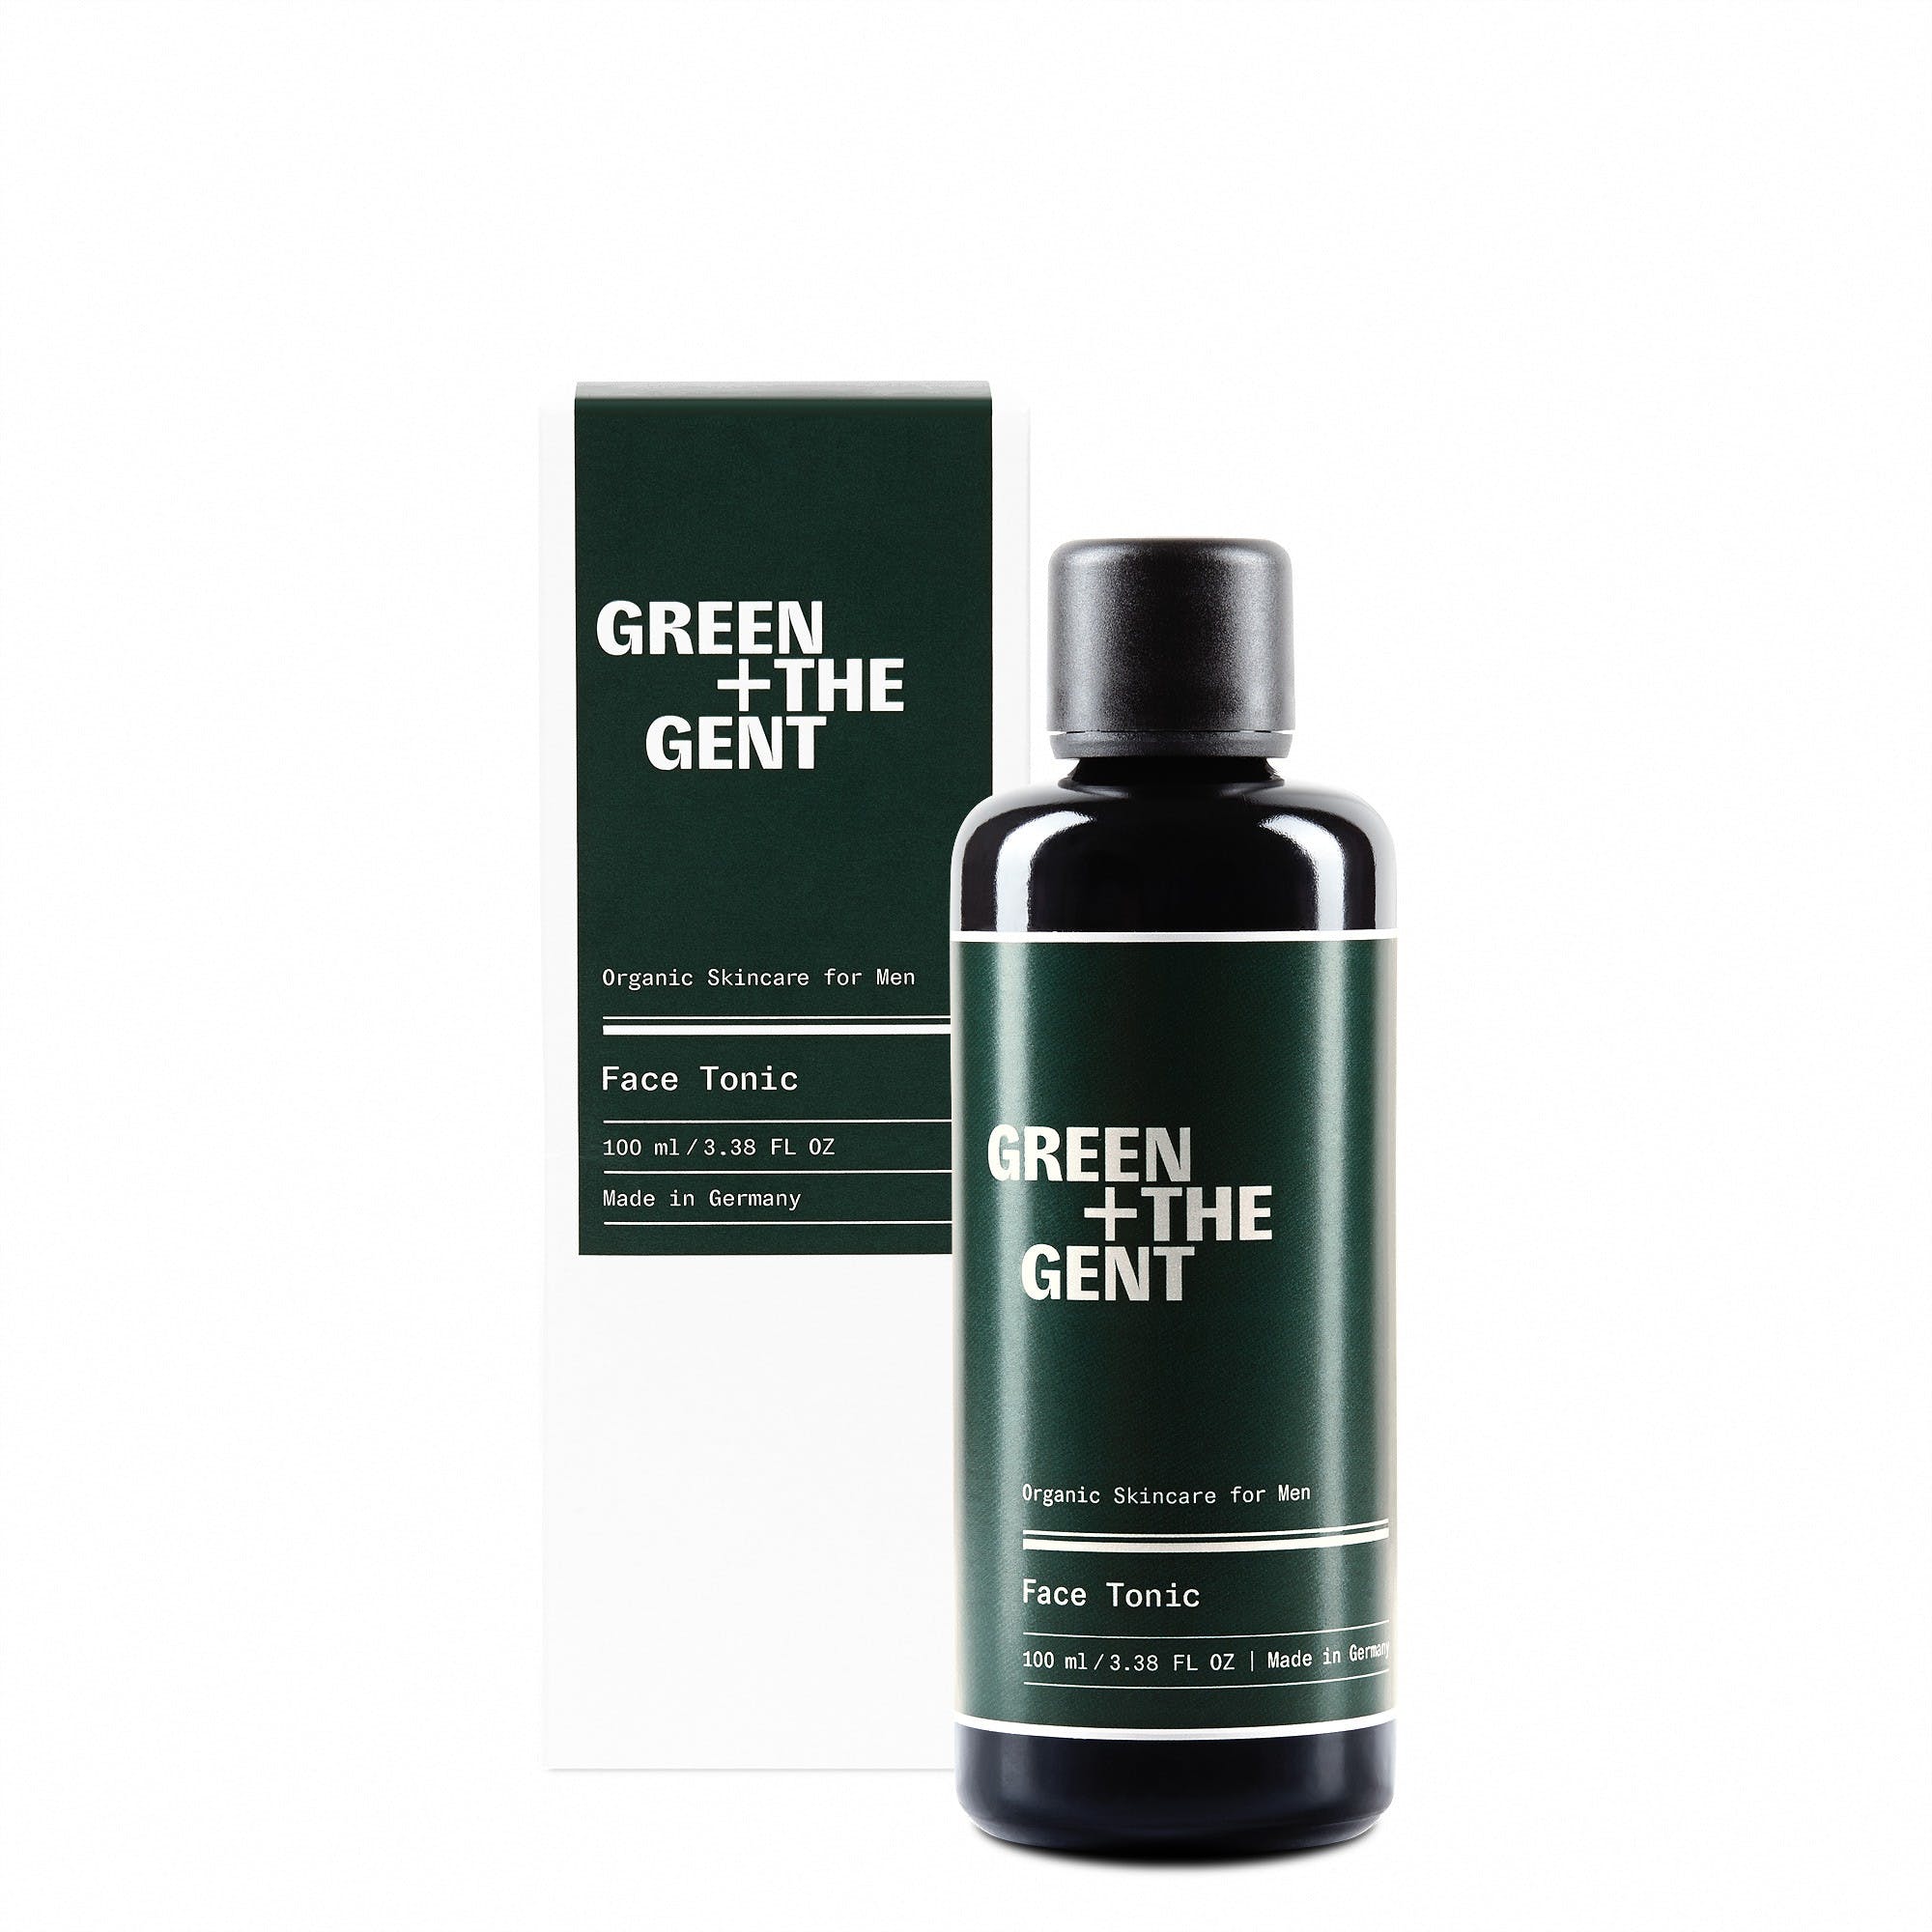 2-in-1 Gesichtstoner & Aftershave | Face Tonic - Green + the Gent